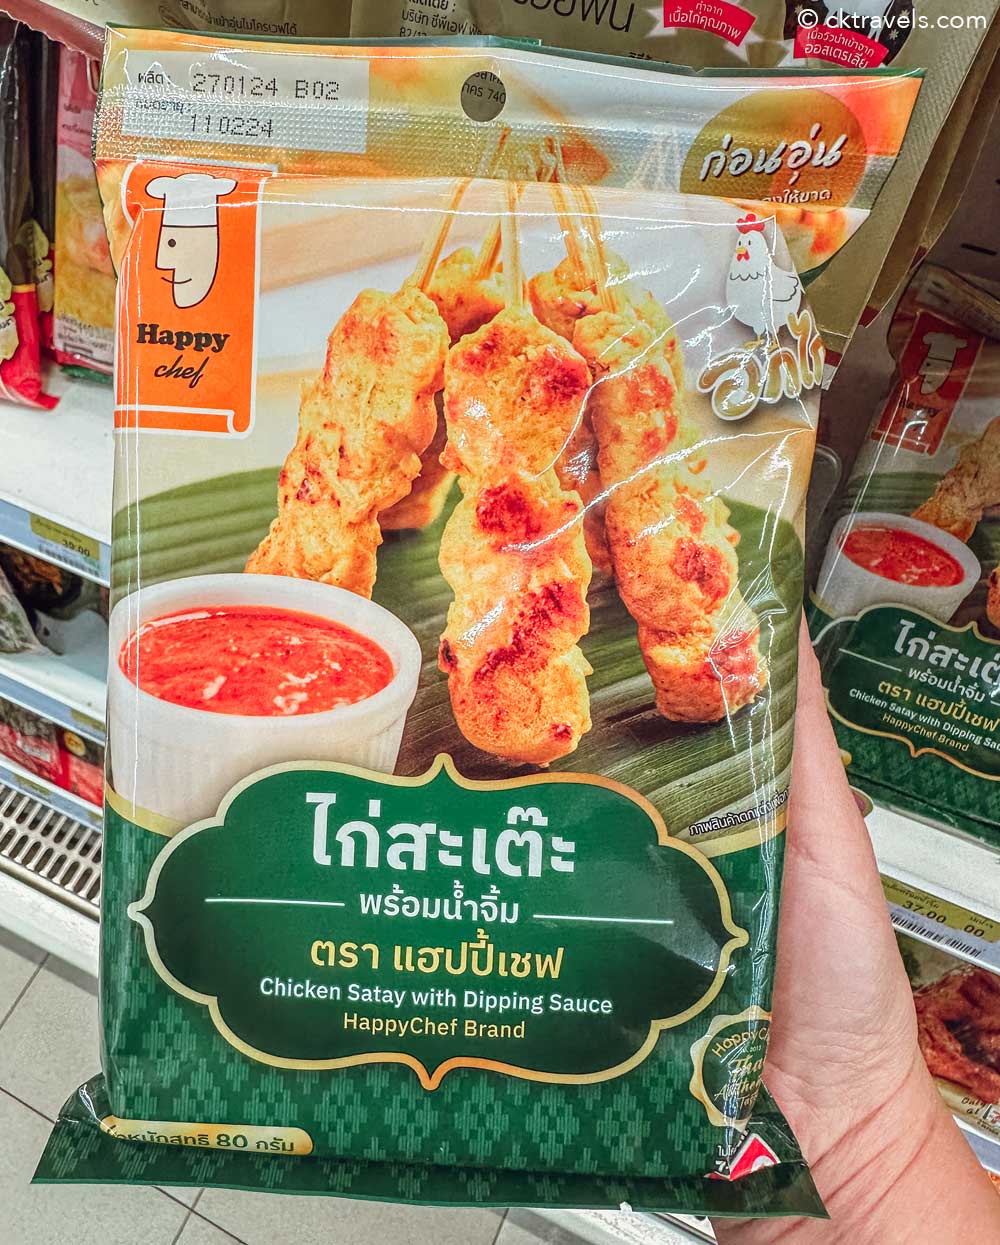 Chicken Satay with Dipping Sauce thailand 7-eleven